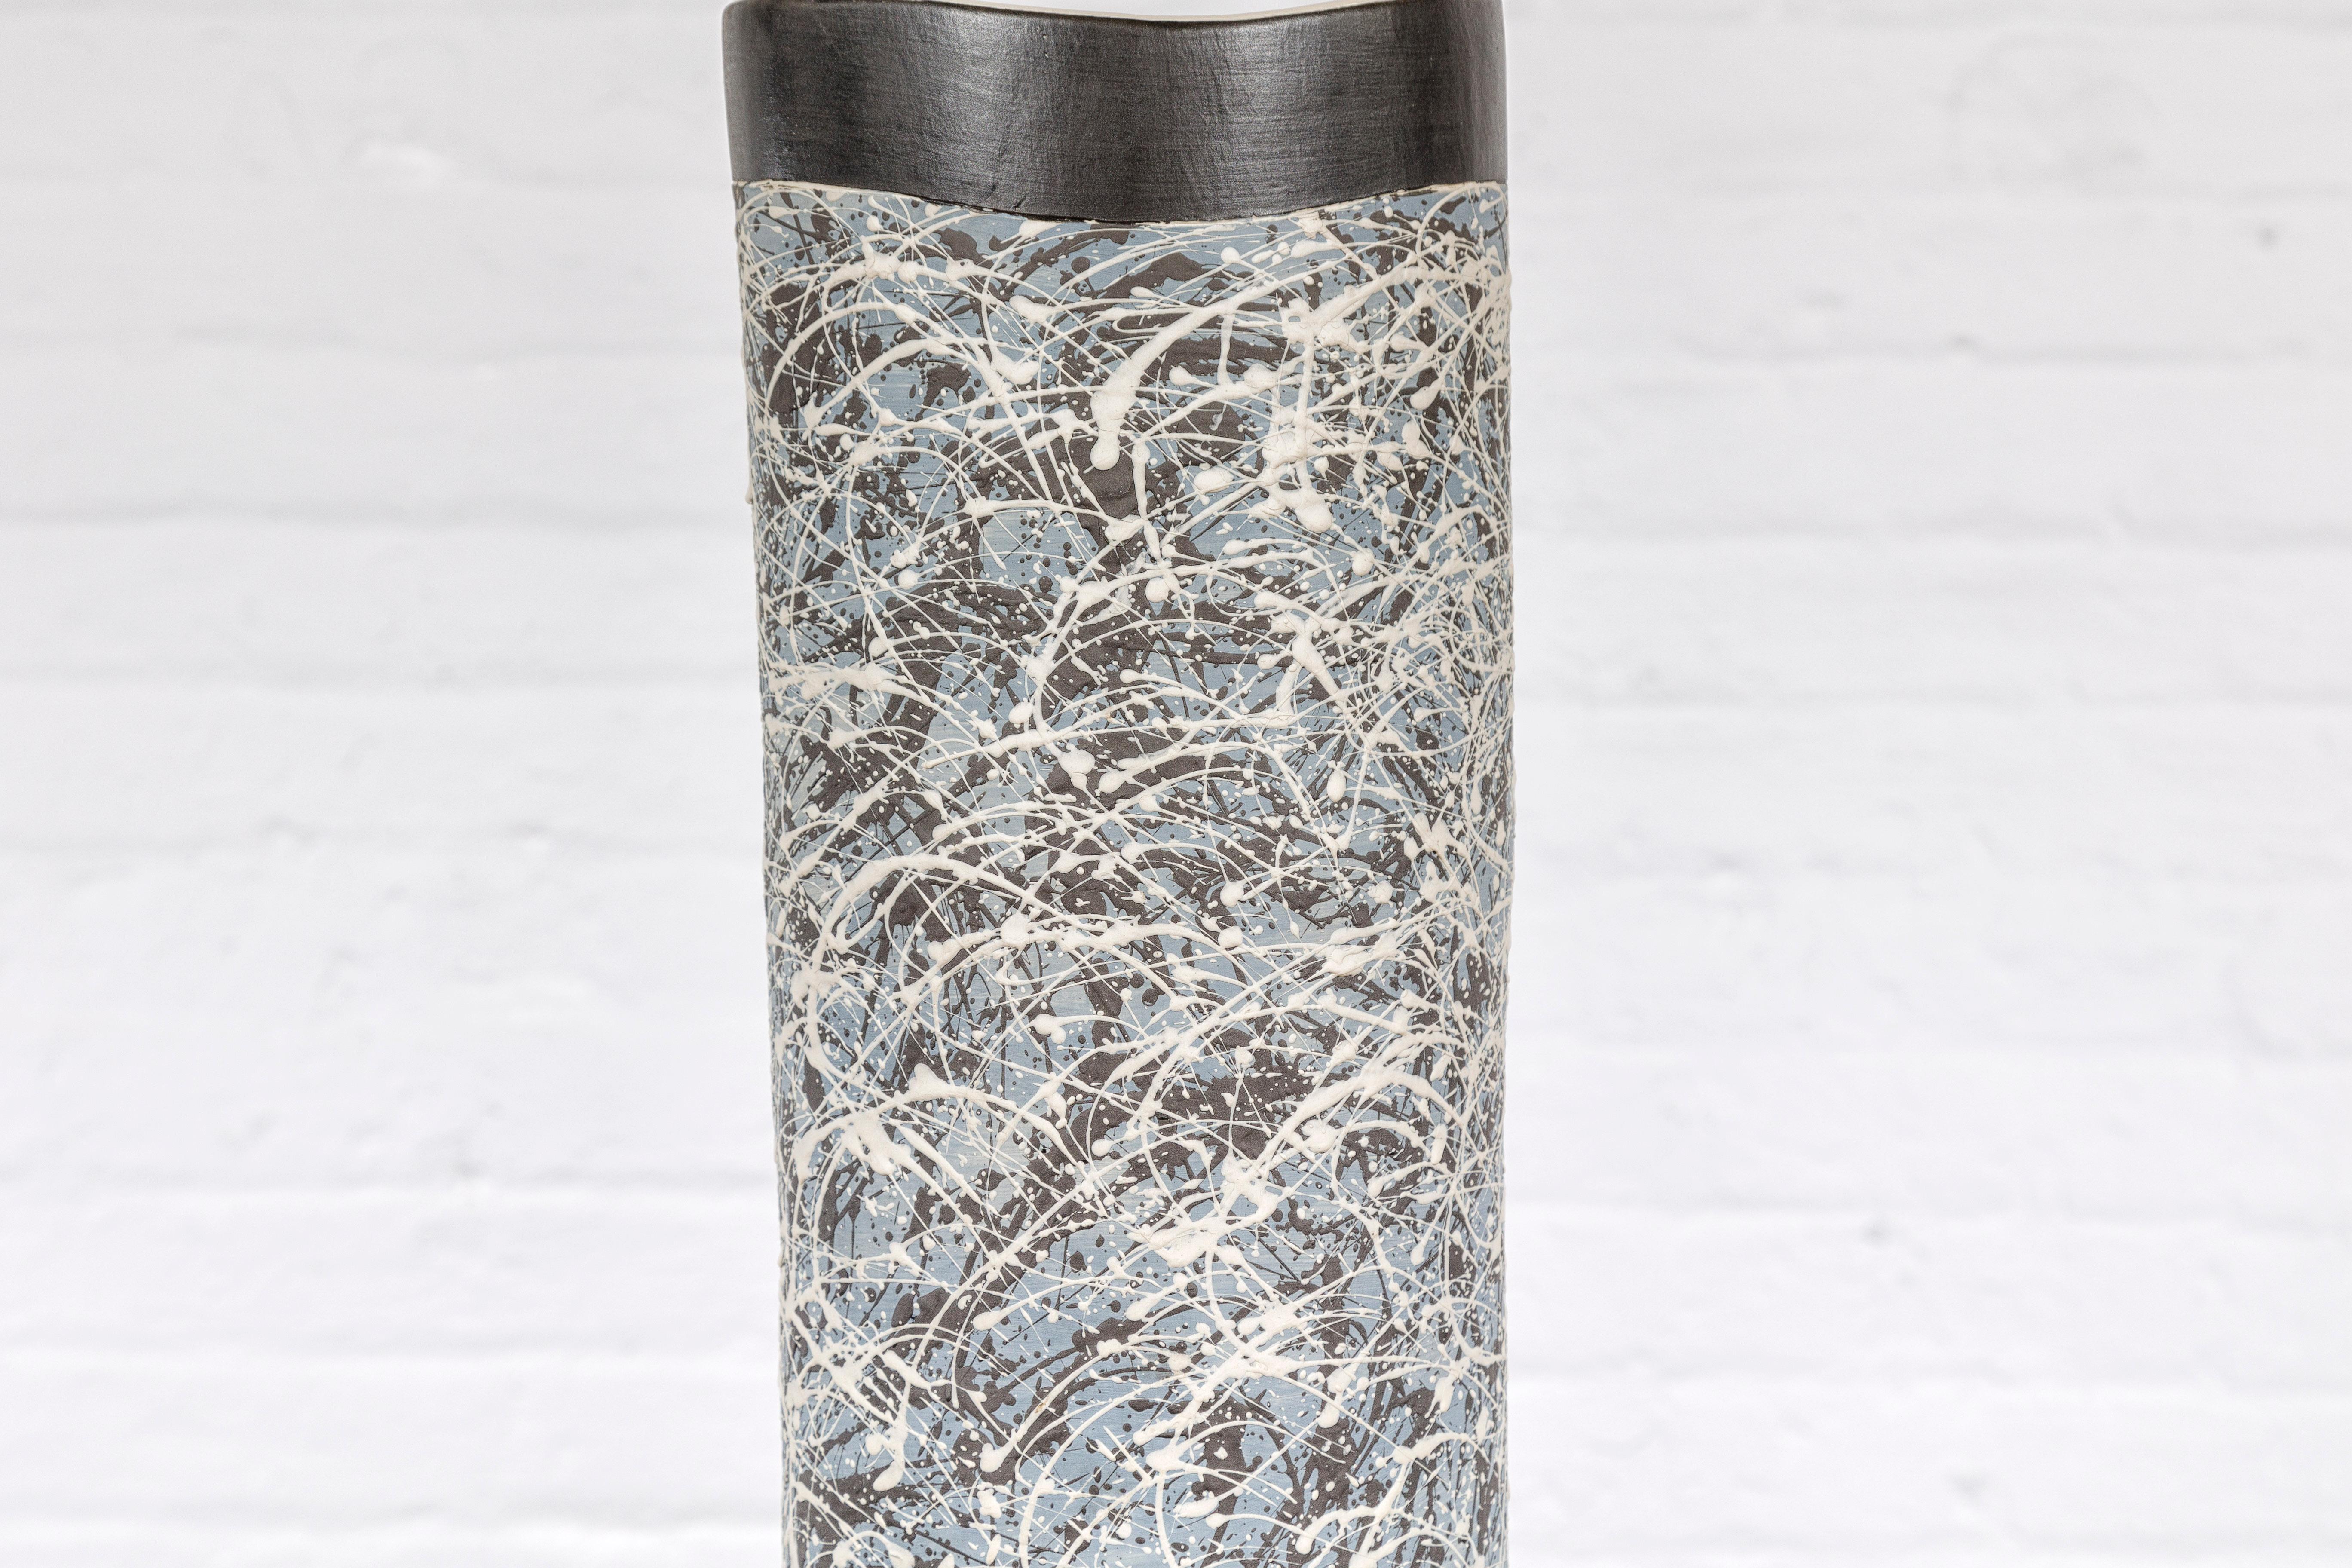 Textured Blue Gray, White, Brown and Black Spattered Ceramic Vase For Sale 3